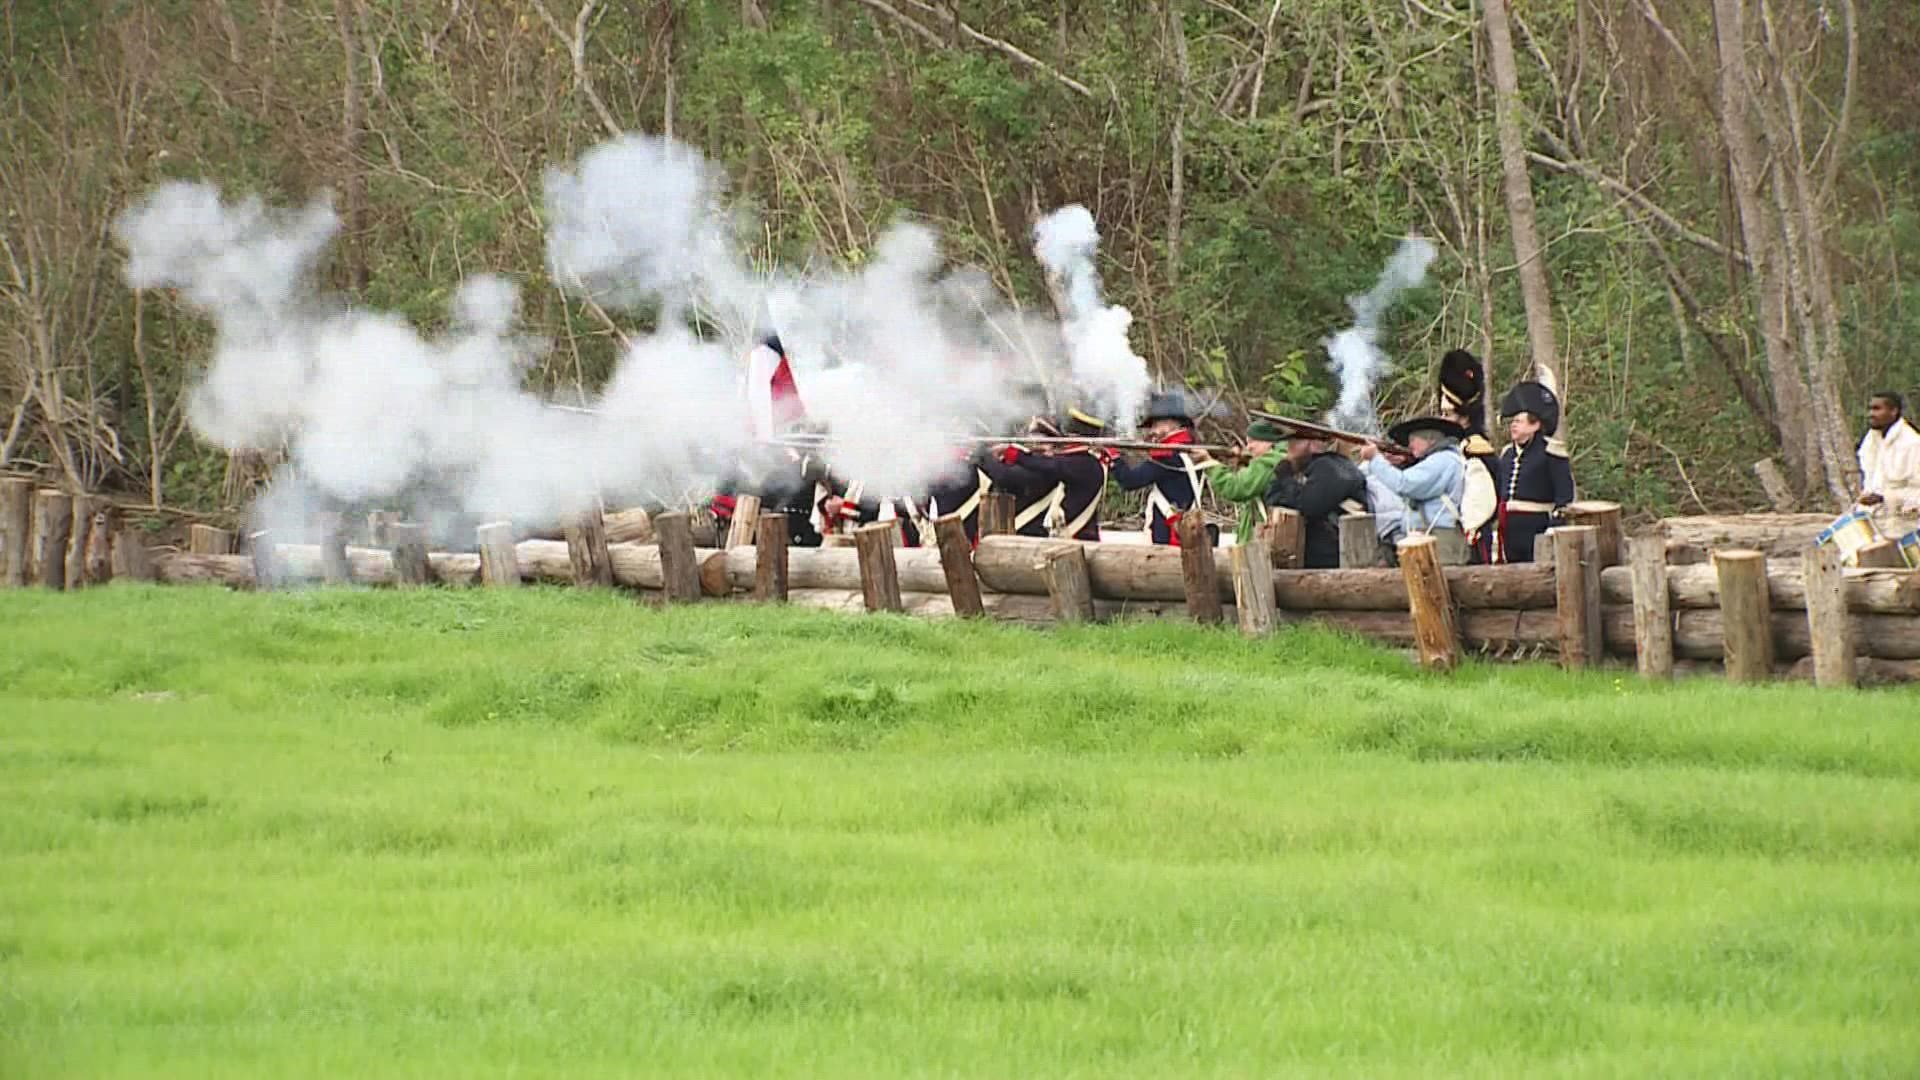 Students were transported 207 years back in time to the Battle of New Orleans.